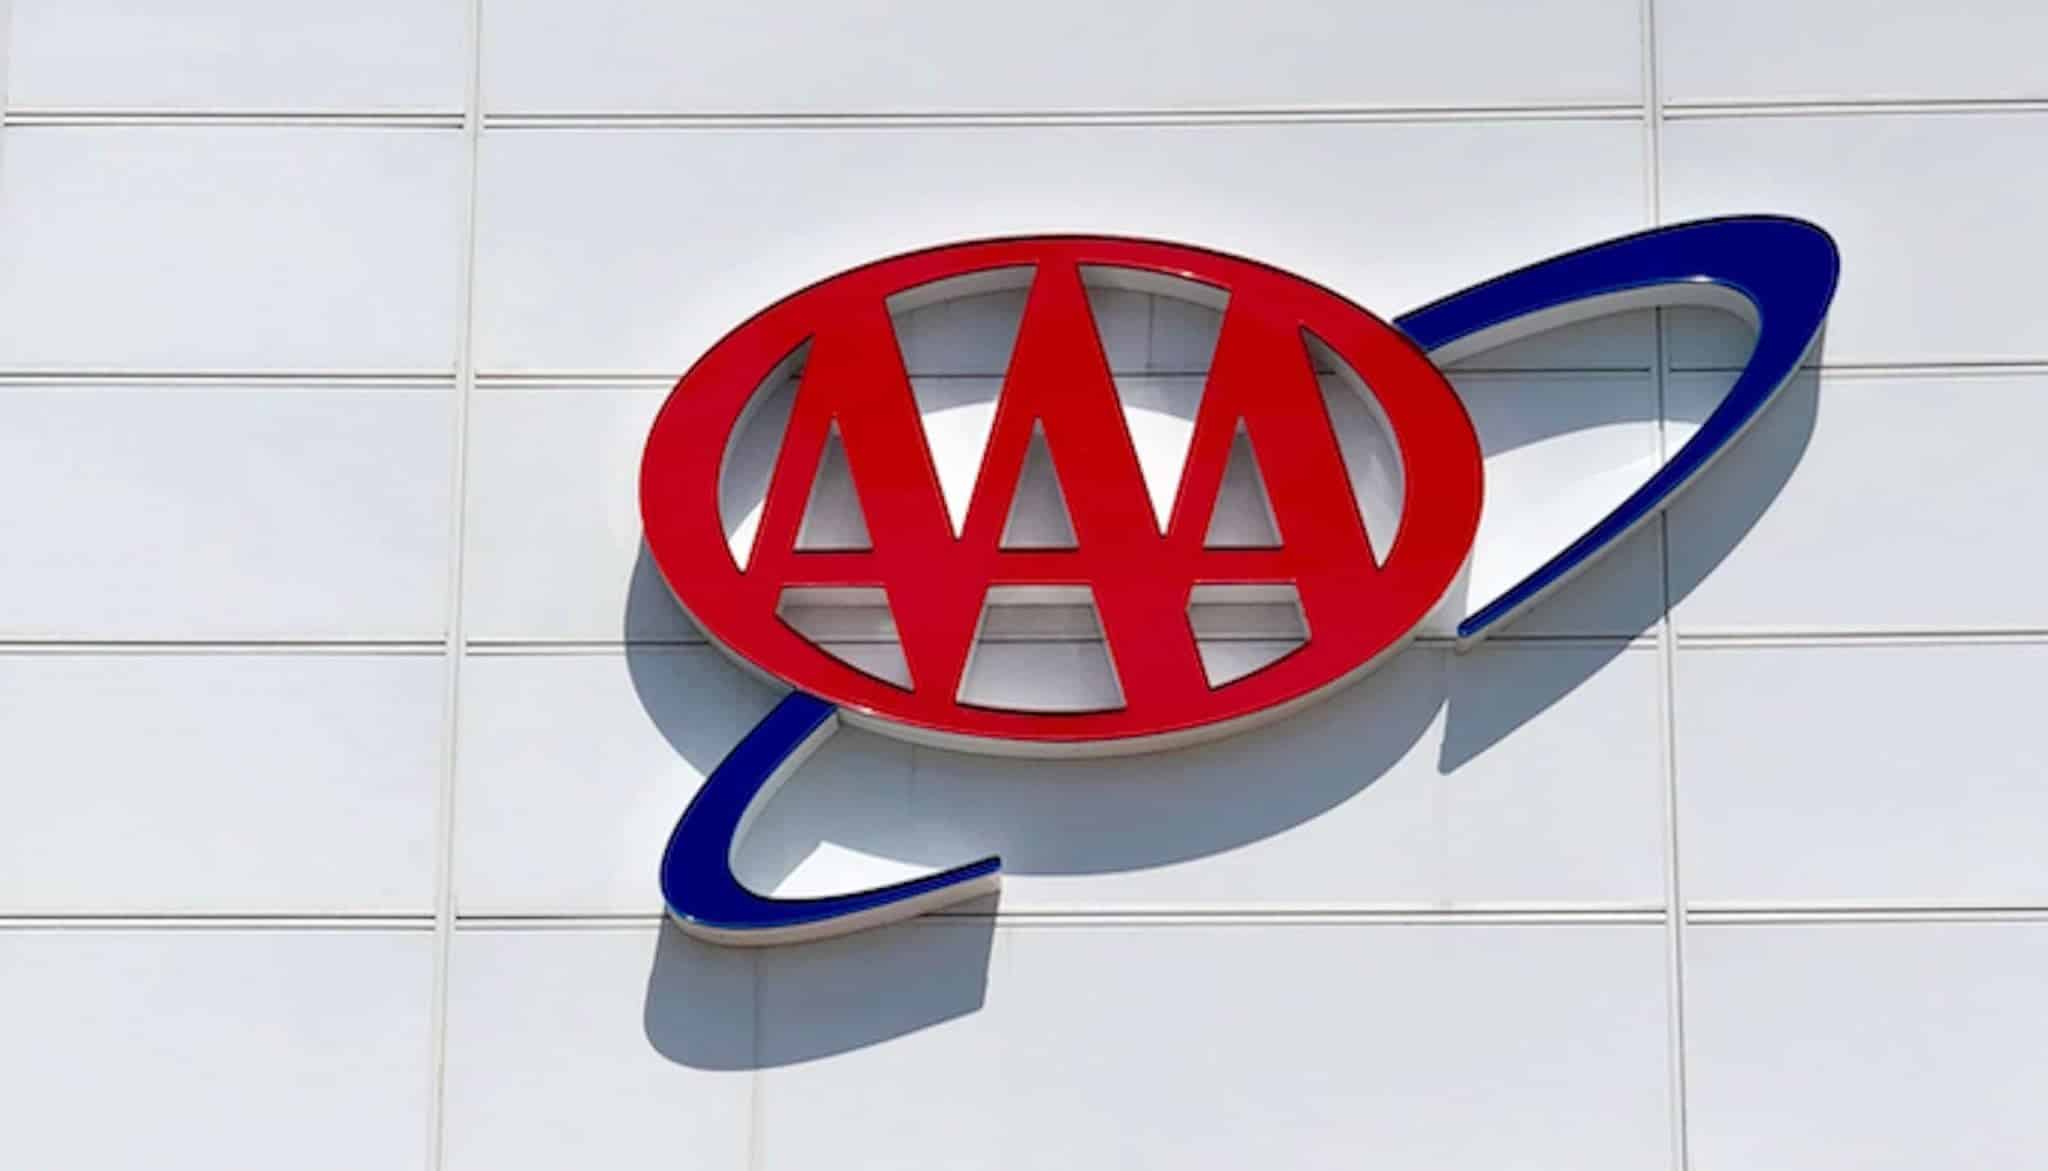 Aaa Payment Insurance